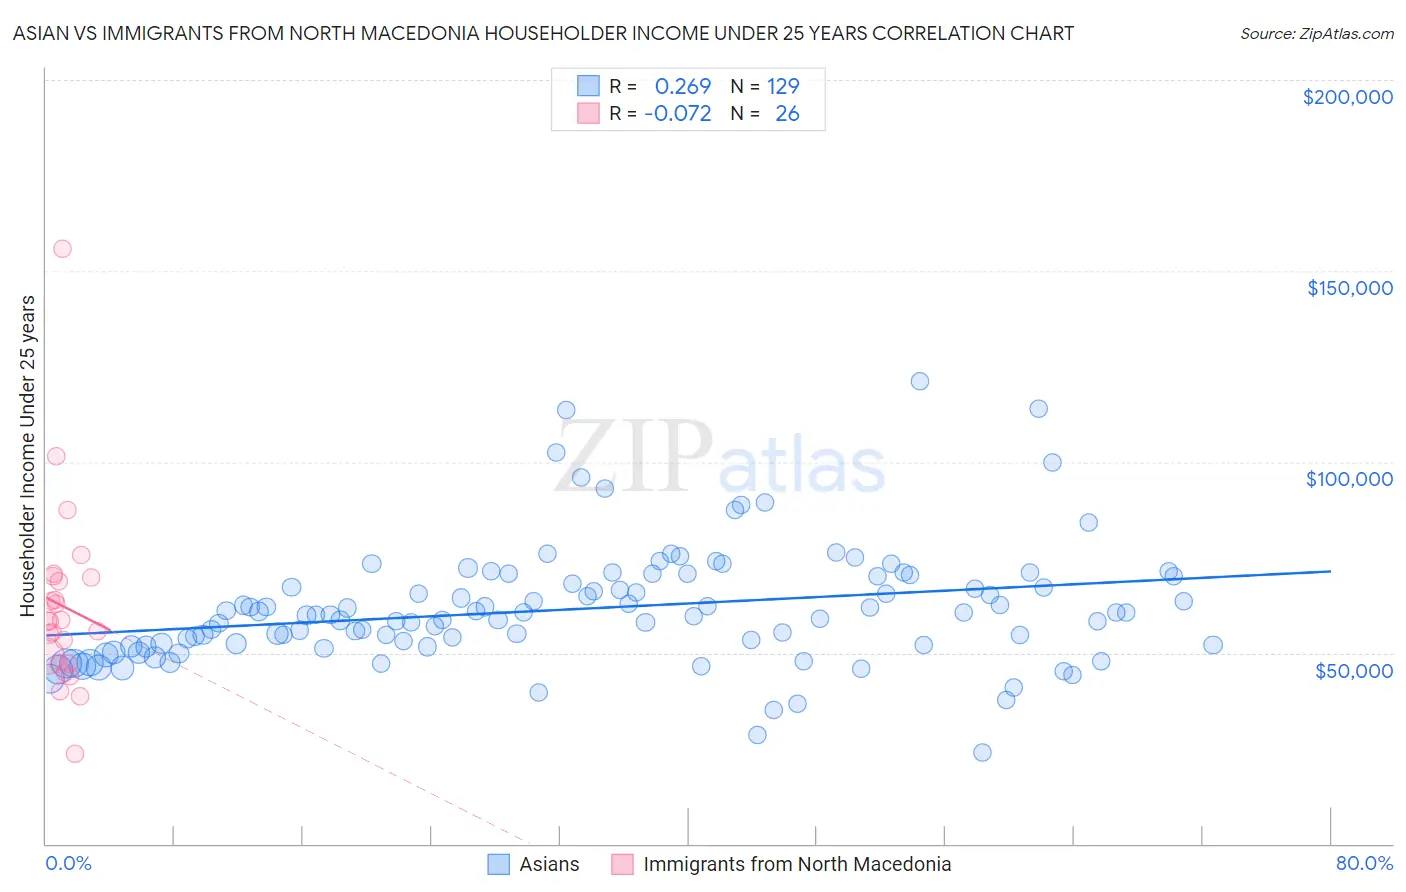 Asian vs Immigrants from North Macedonia Householder Income Under 25 years